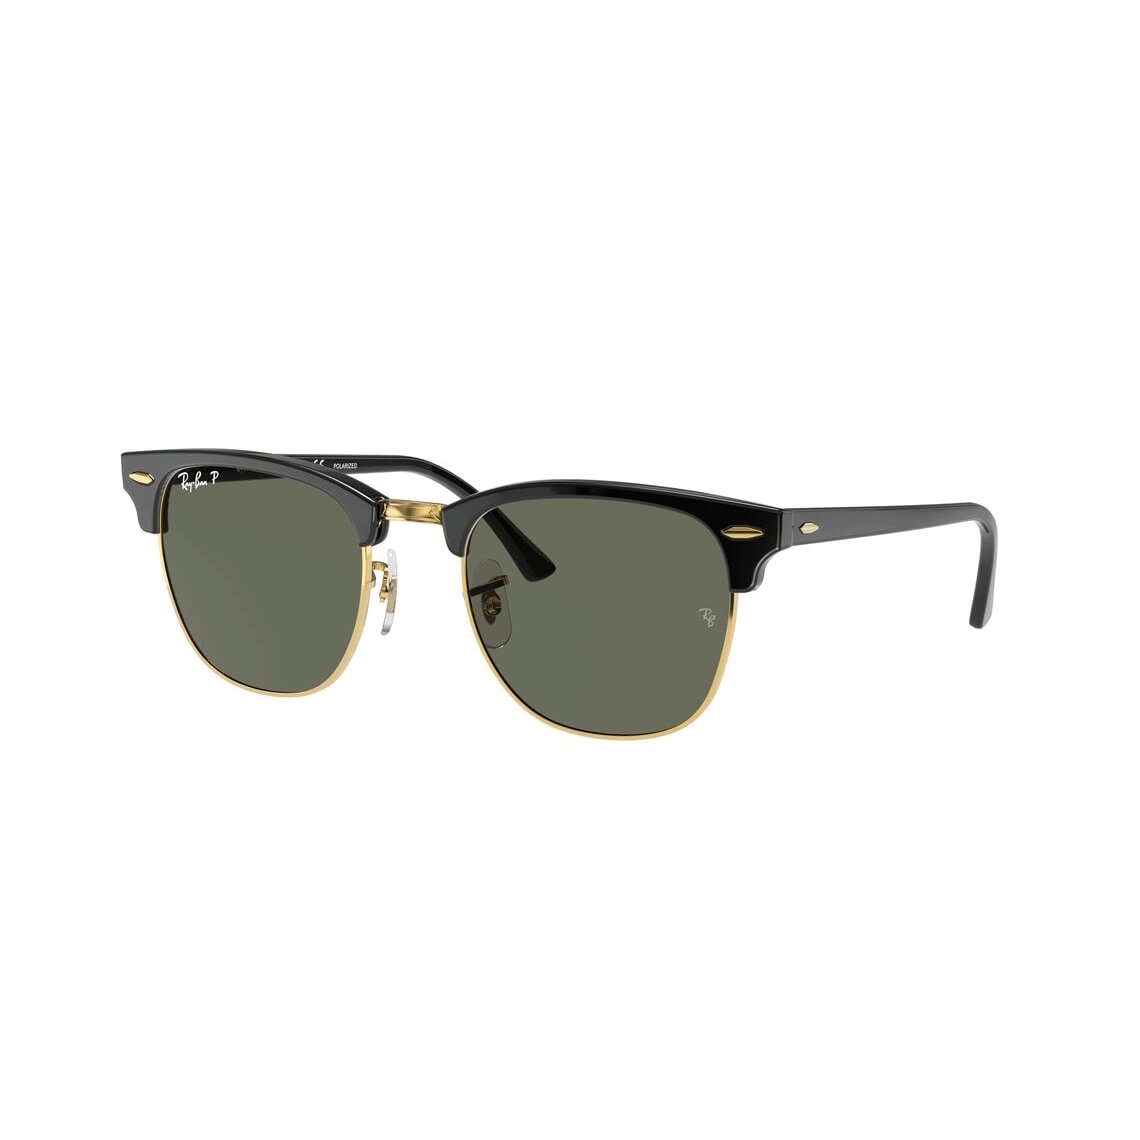 Ray-Ban Clubmaster RB3016 901/58 5521